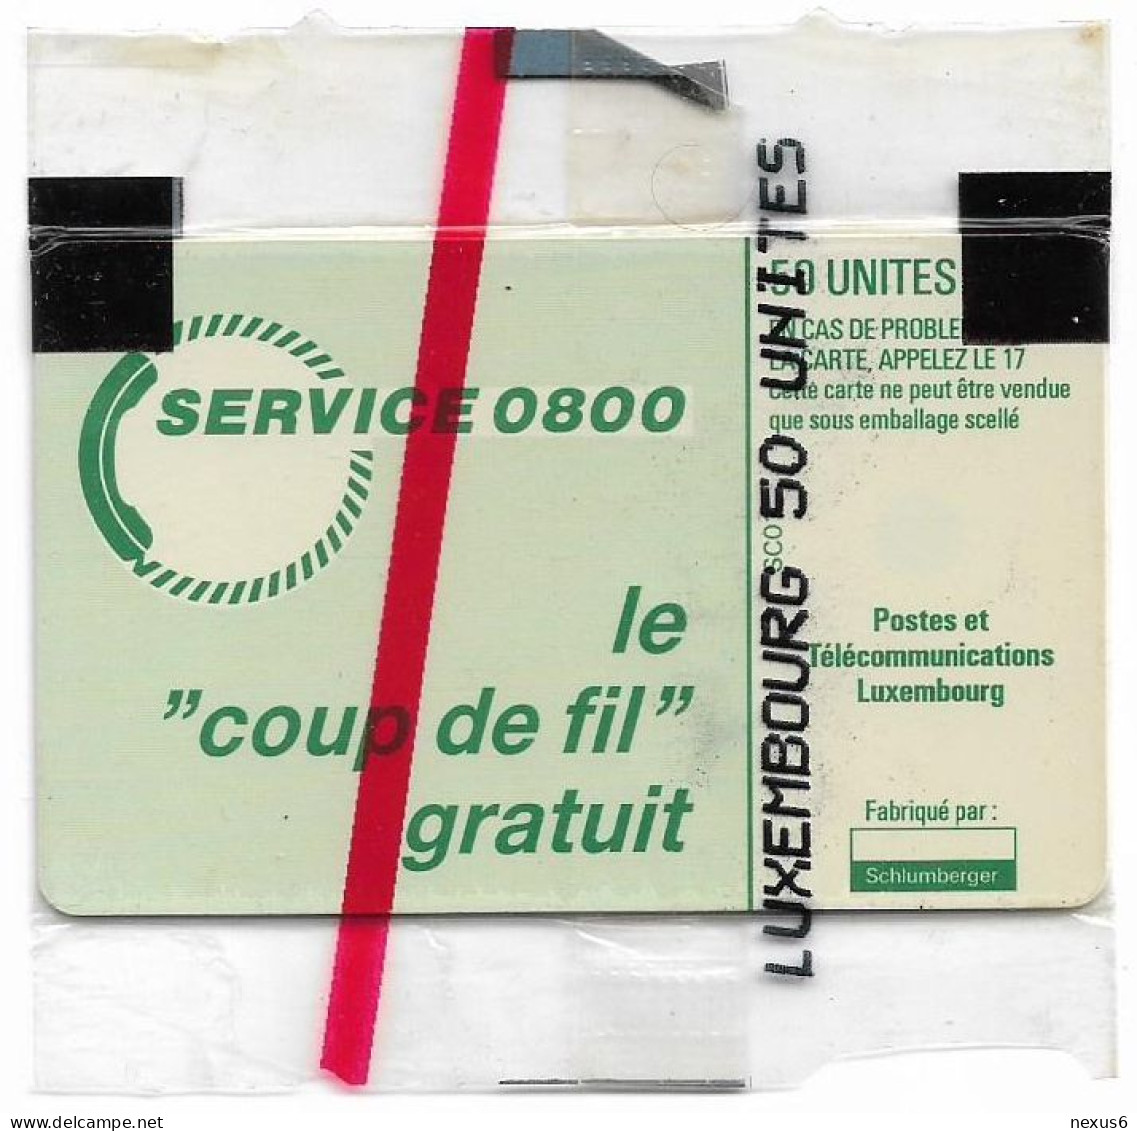 Luxembourg - P&T - Service 0800, No CN., SC6, 07.1991, 50Units, 50.000ex, NSB - Luxembourg